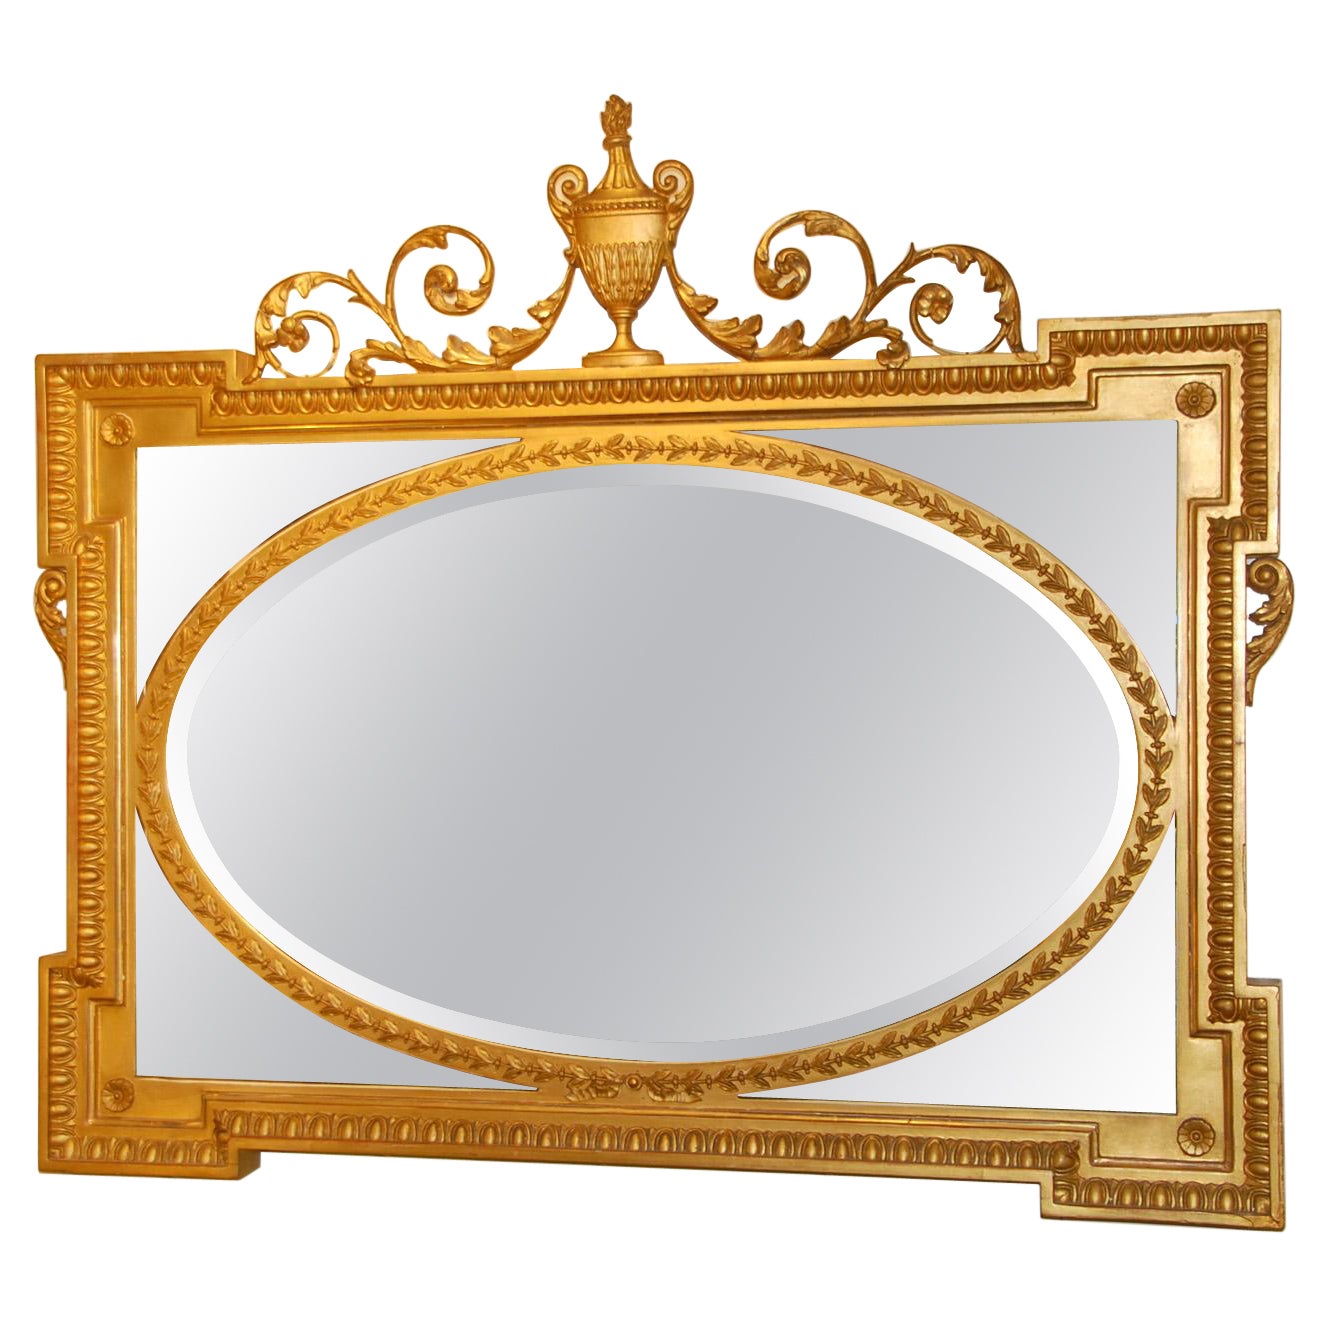 English Edwardian Gold Mirror with Urn and Trailing Leaves Surmounting the Frame For Sale